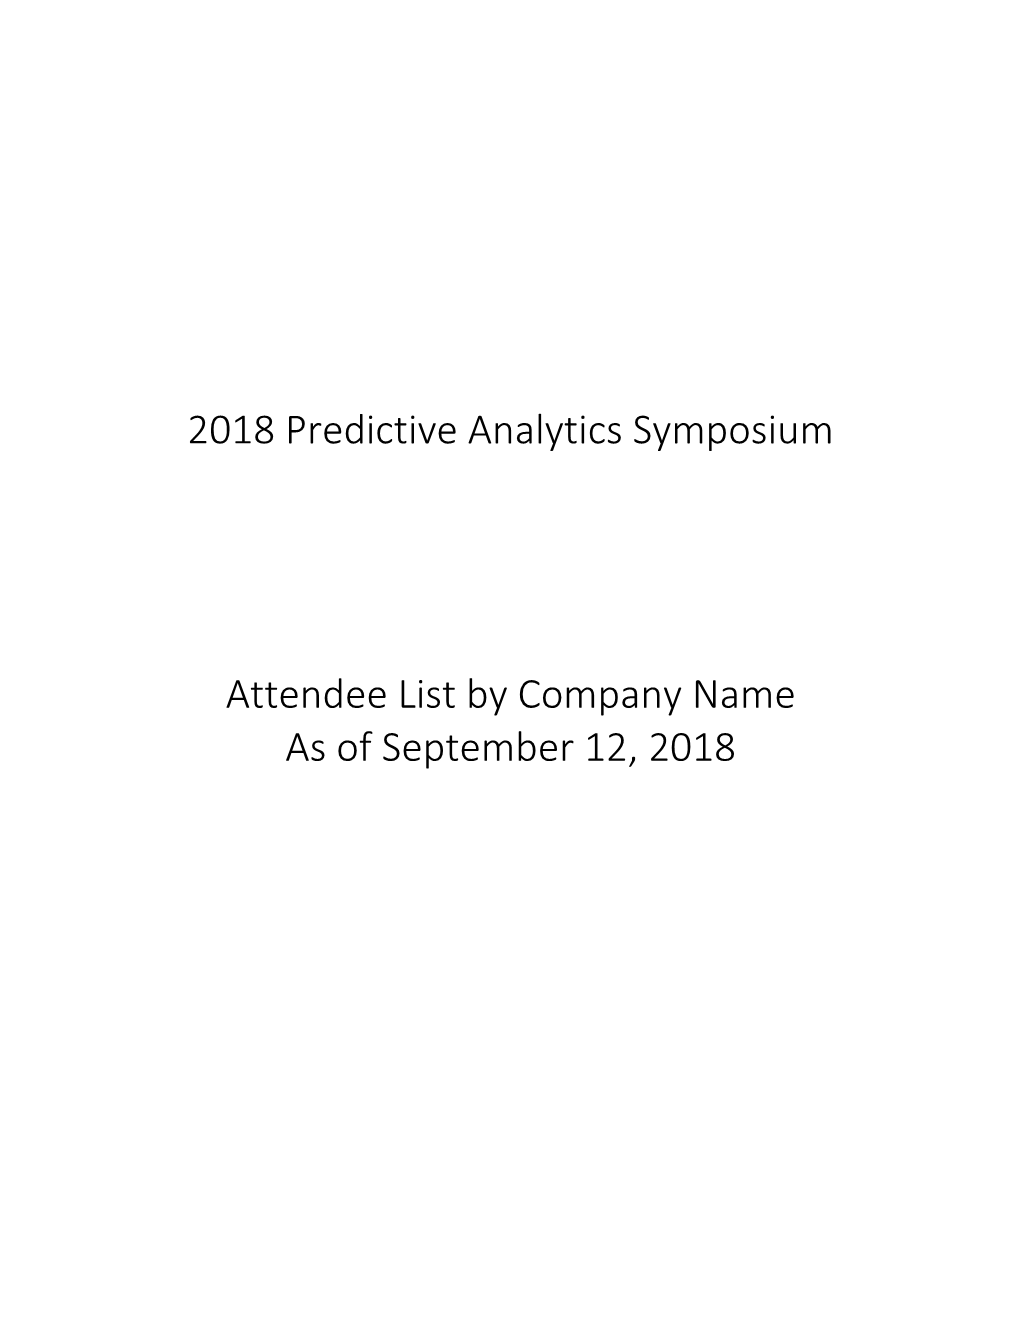 2018 Predictive Analytics Symposium Attendee List by Company Name